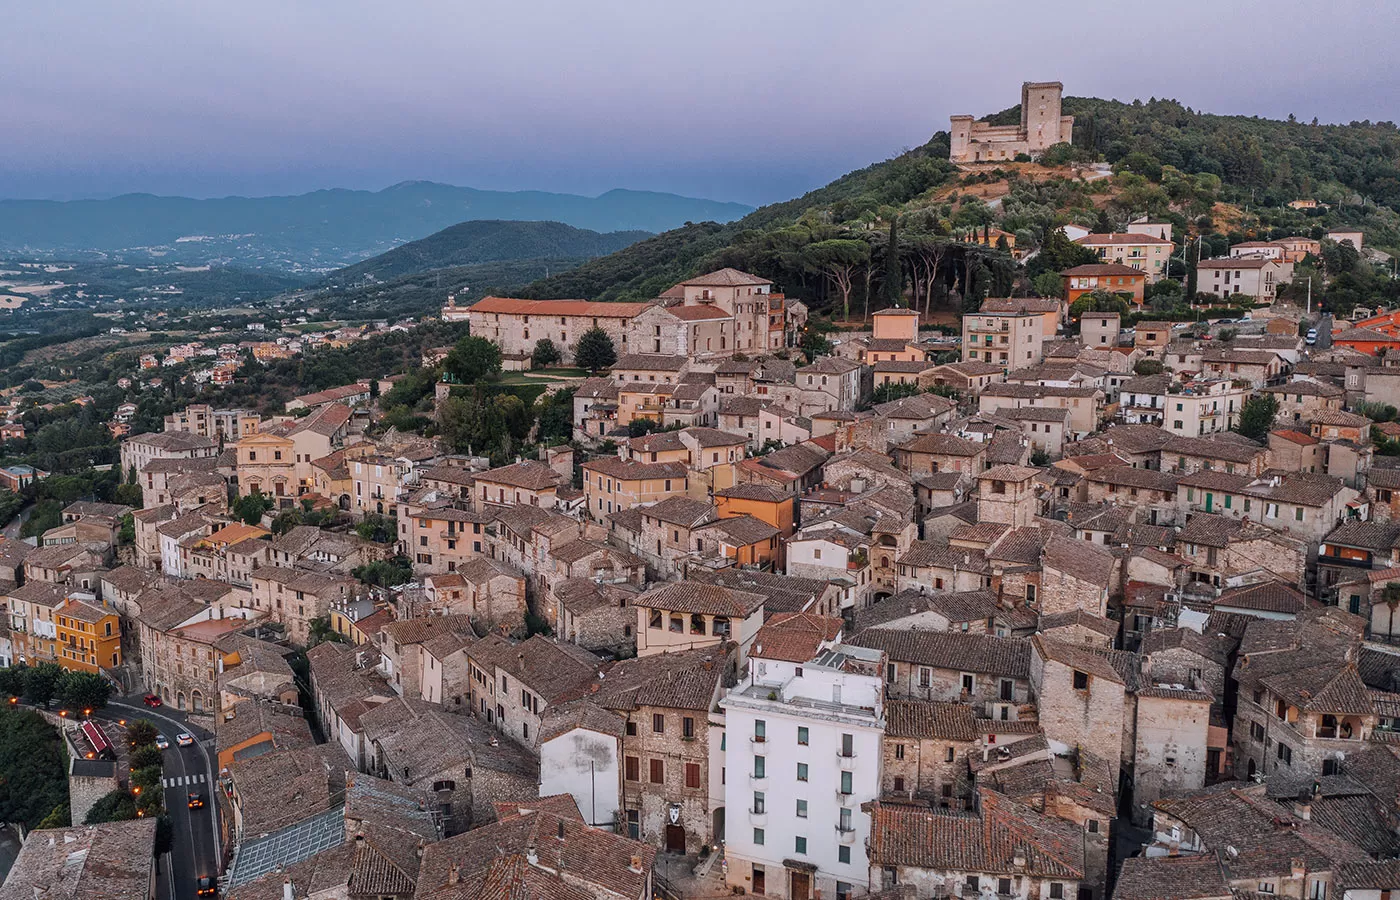 Things to do in Umbria Italy - Sunset in Narni